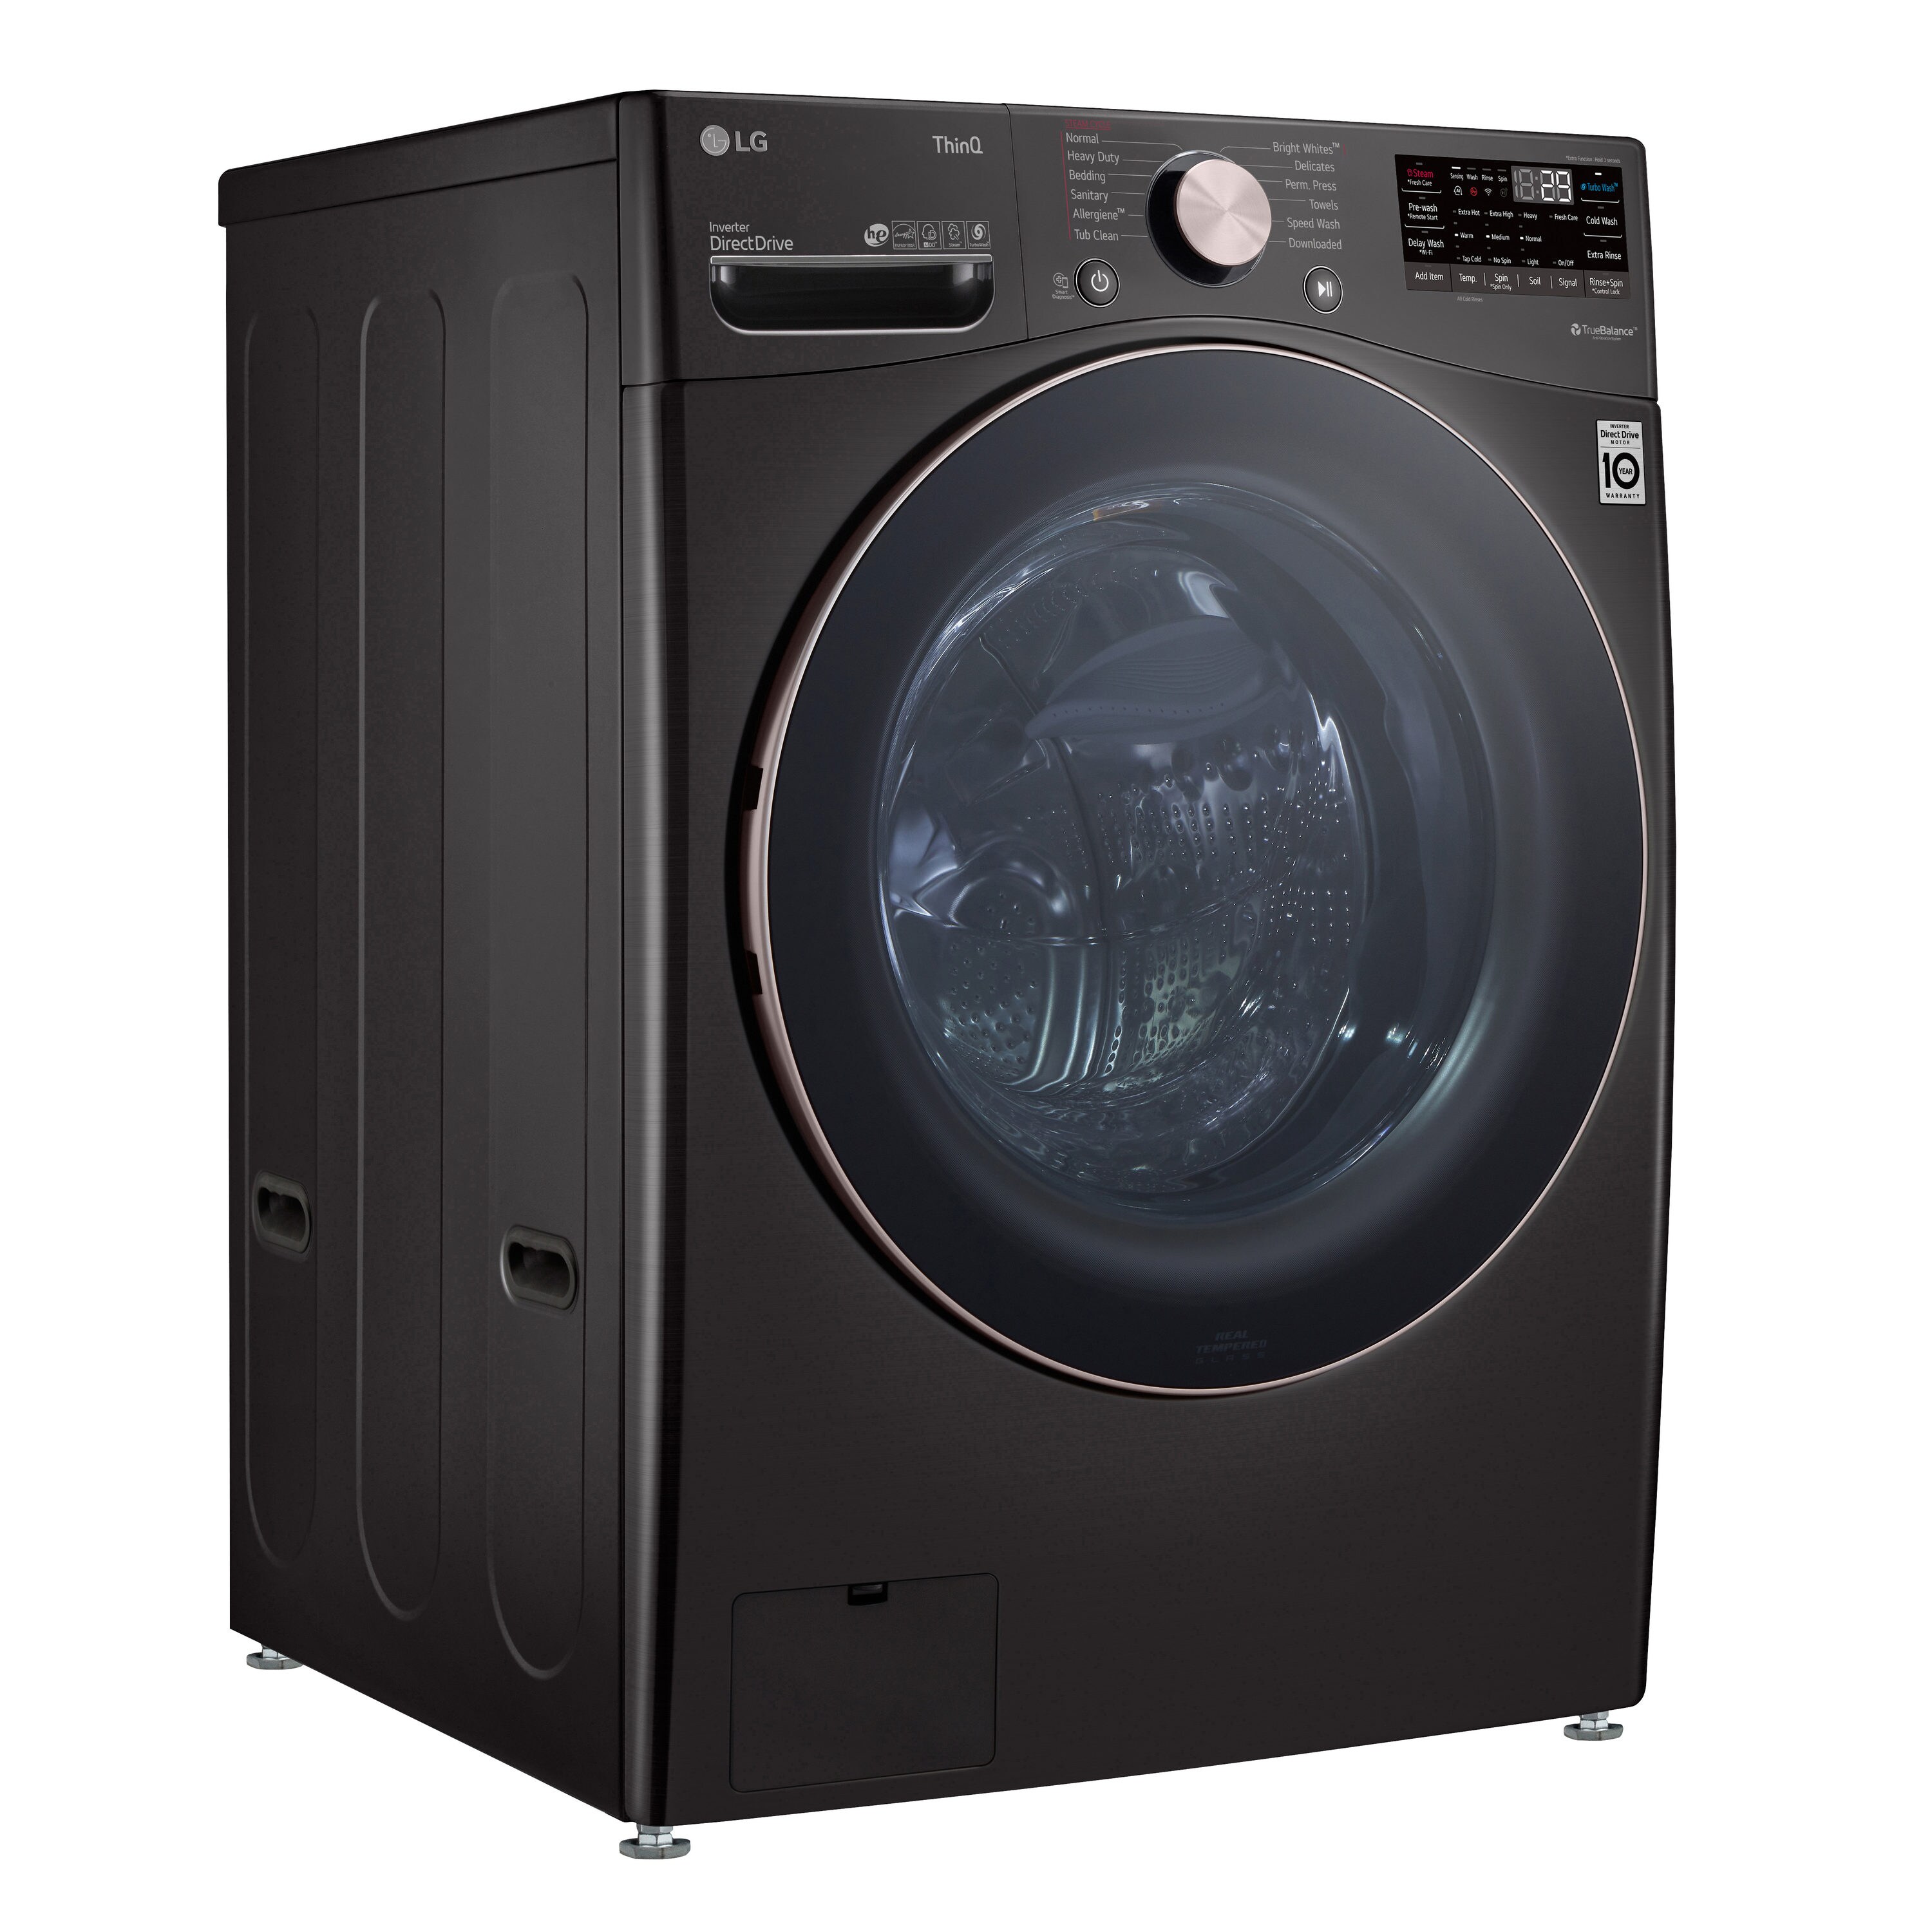 LG Large Capacity Smart WiFi Front Load Washer with TurboWash 360 - 4.5 cu.  ft. Black Steel